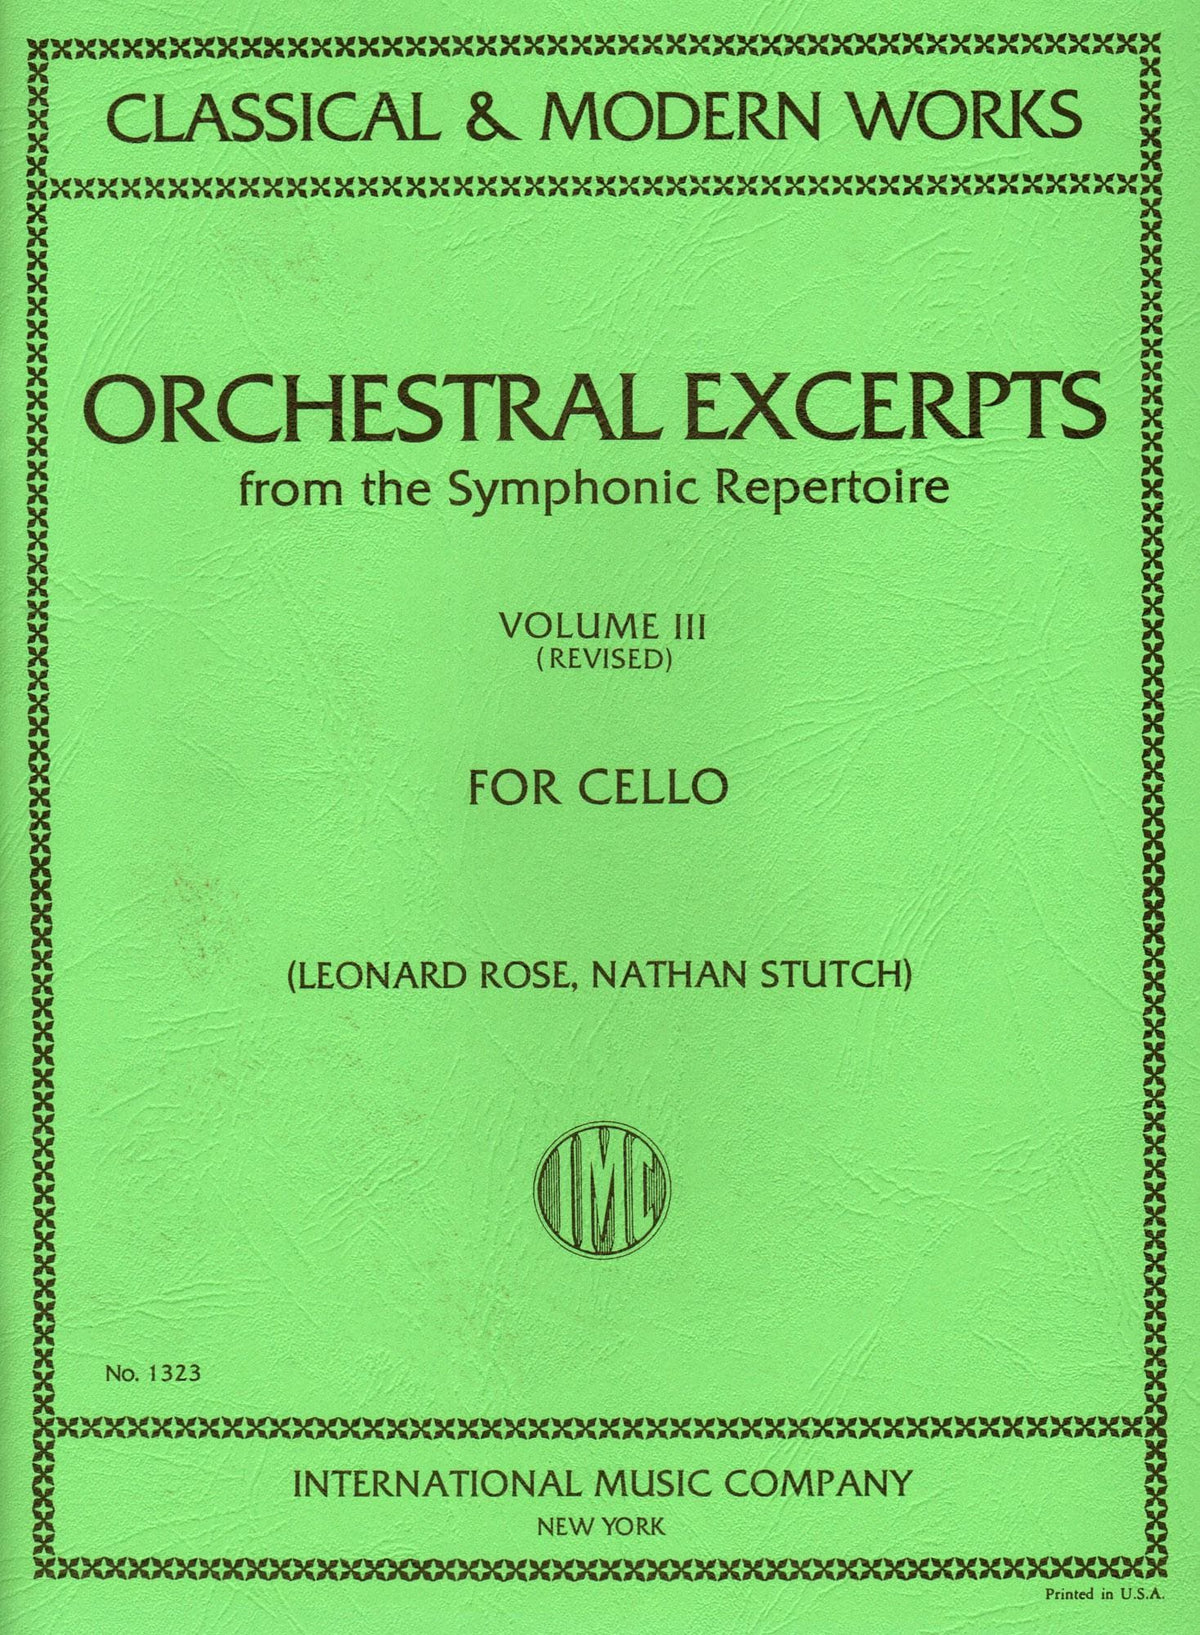 Orchestral Excerpts, Volume 3 - Cello - edited by Leonard Rose and Nathan Stutch - International Music Company